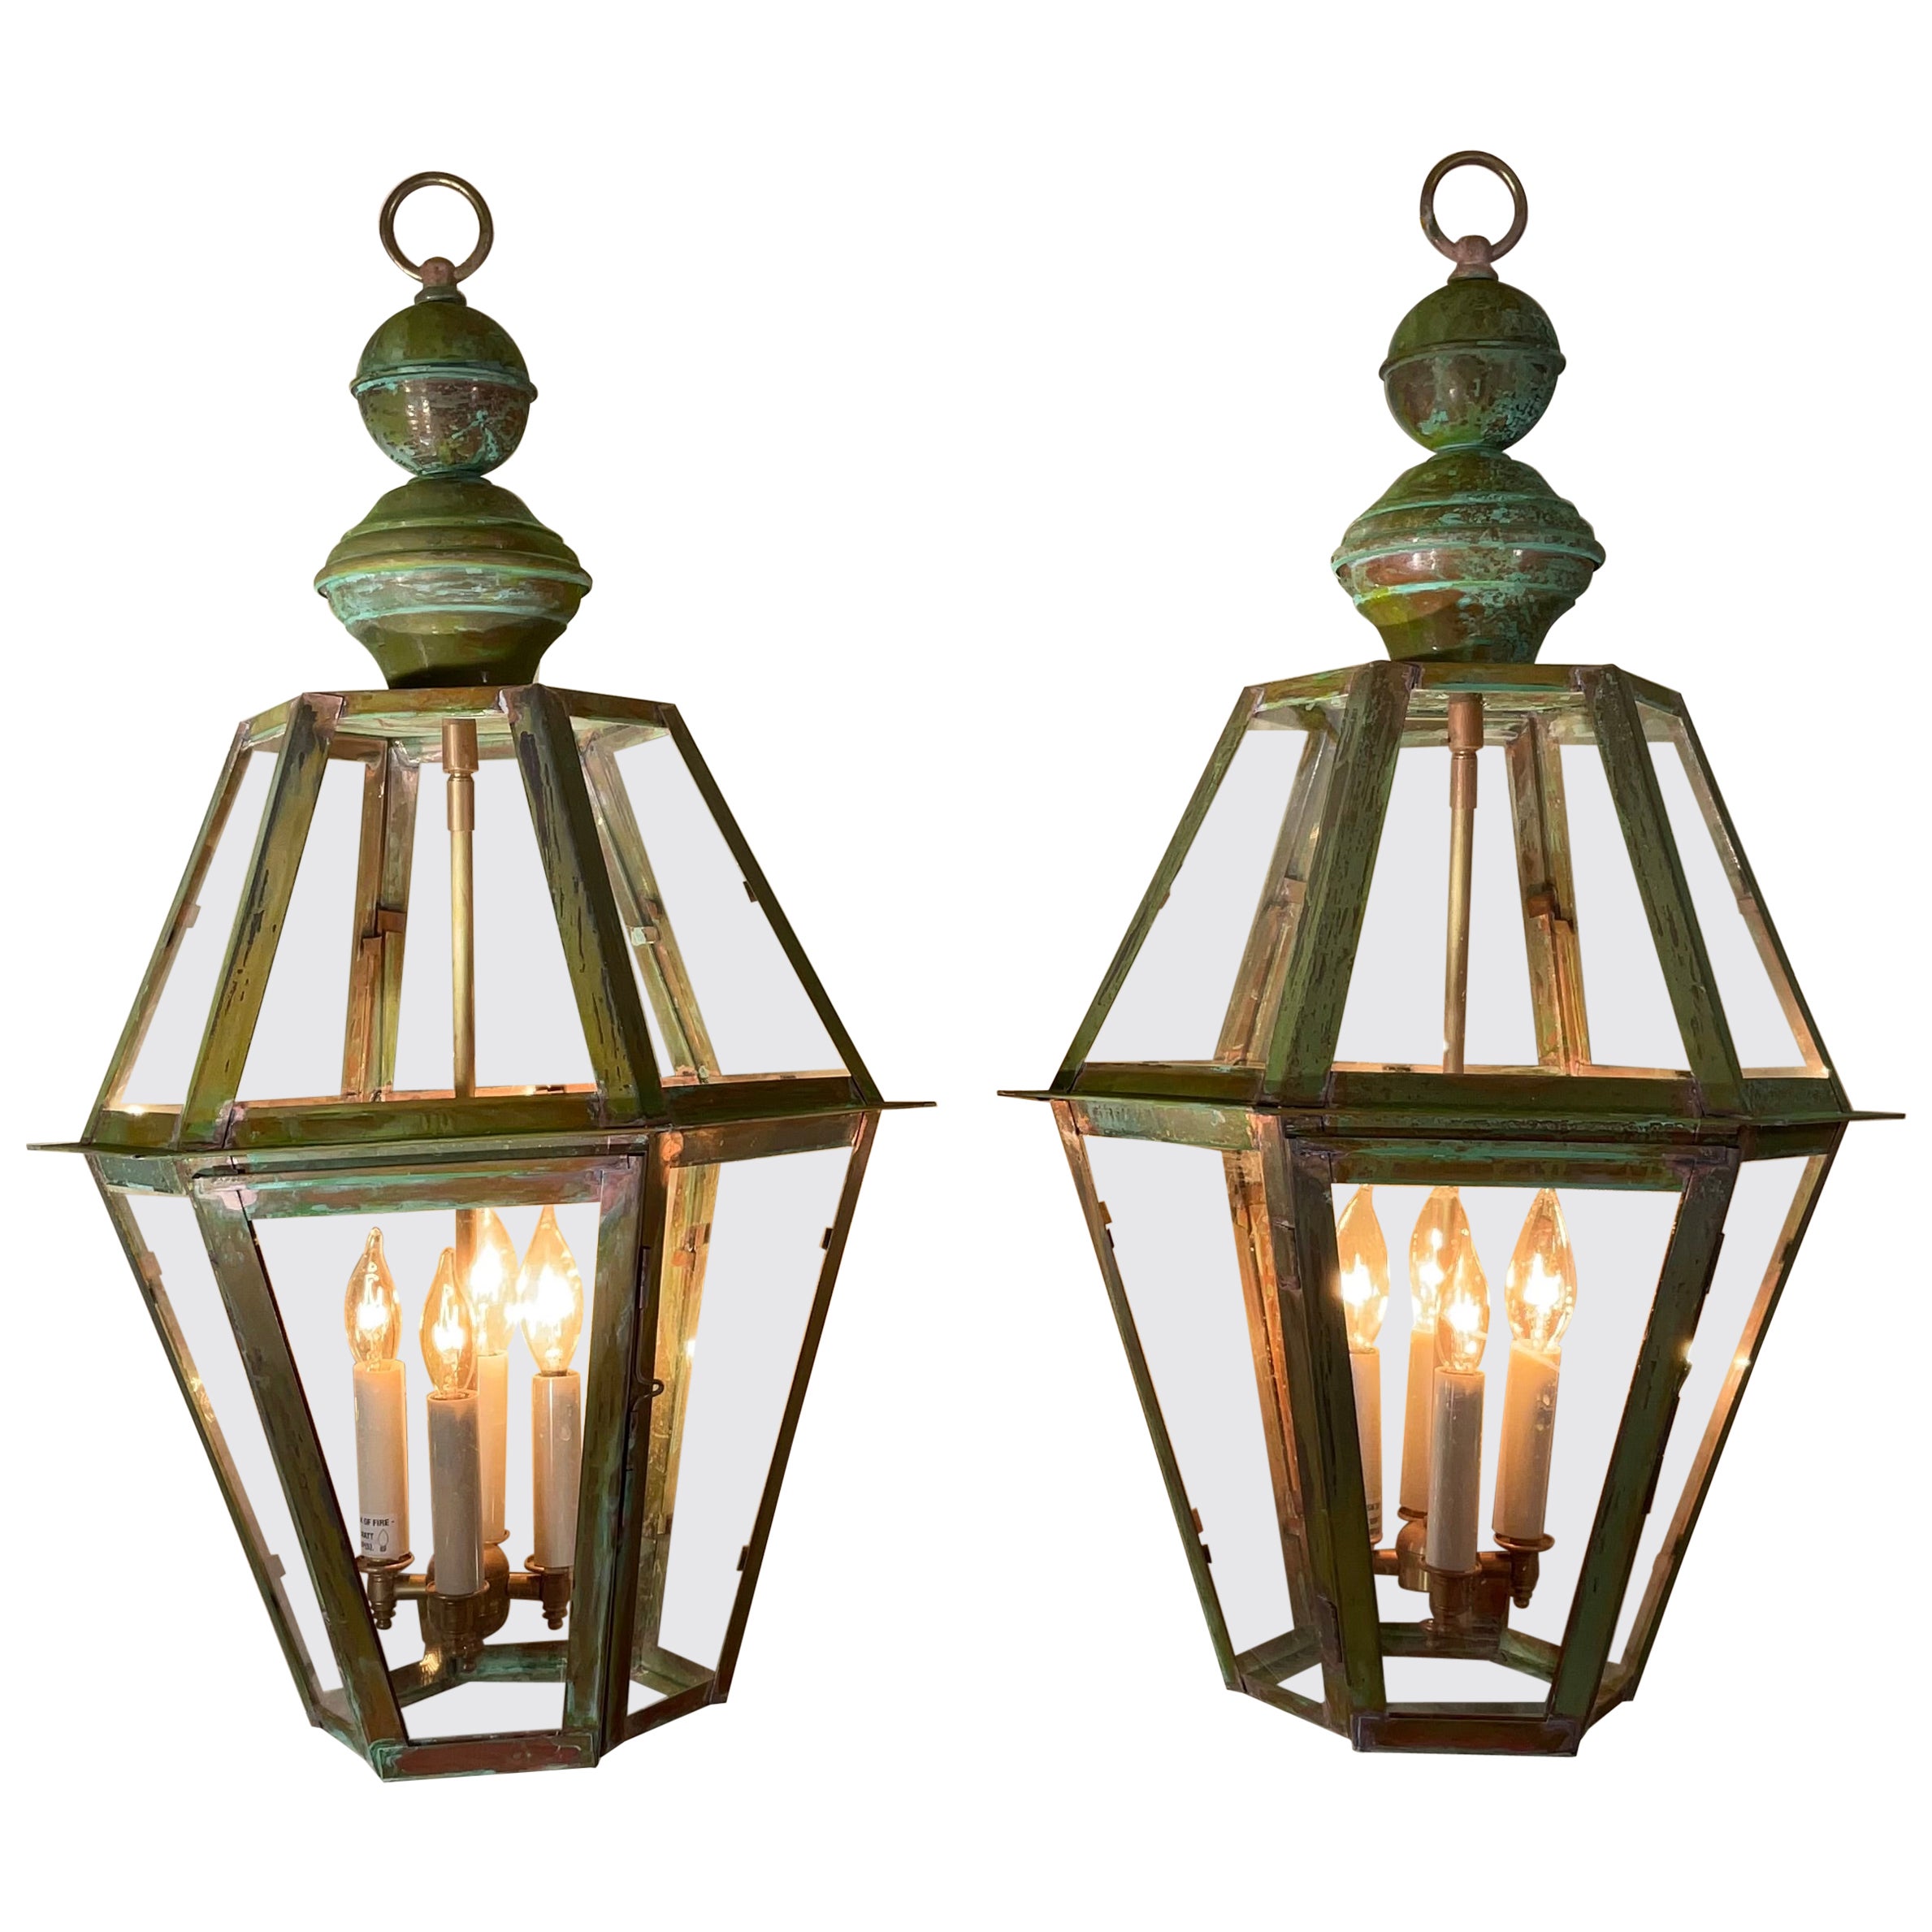 Pair Of Six Sides Solid Copper And Brass Handcrafted Hanging Lanterns For Sale